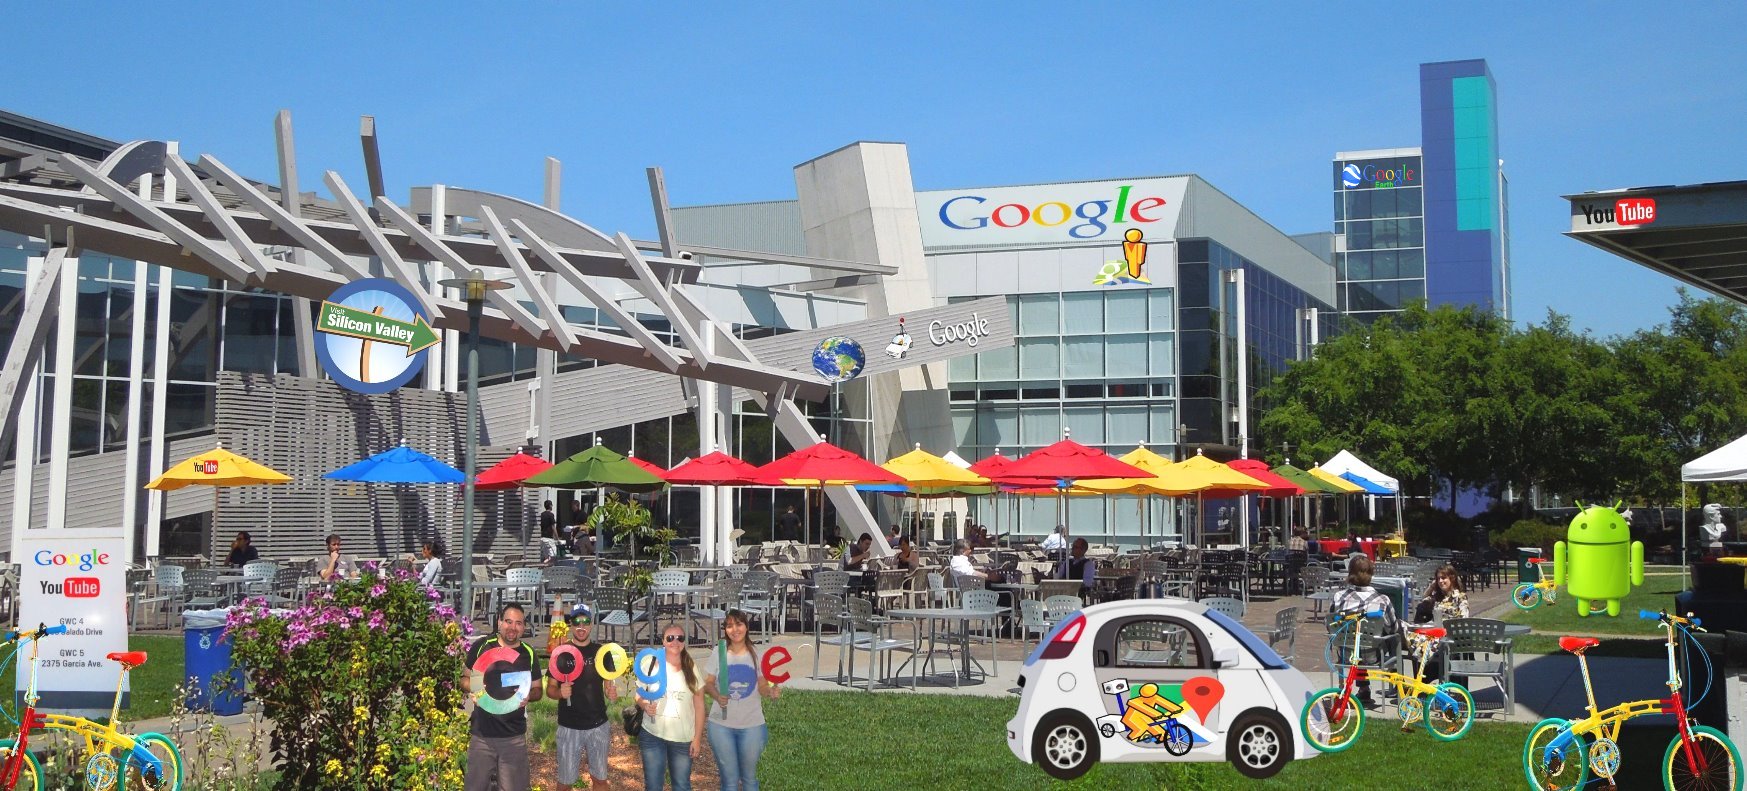 Google Campus and headquarters Silicon Valley High-Tech Tours from